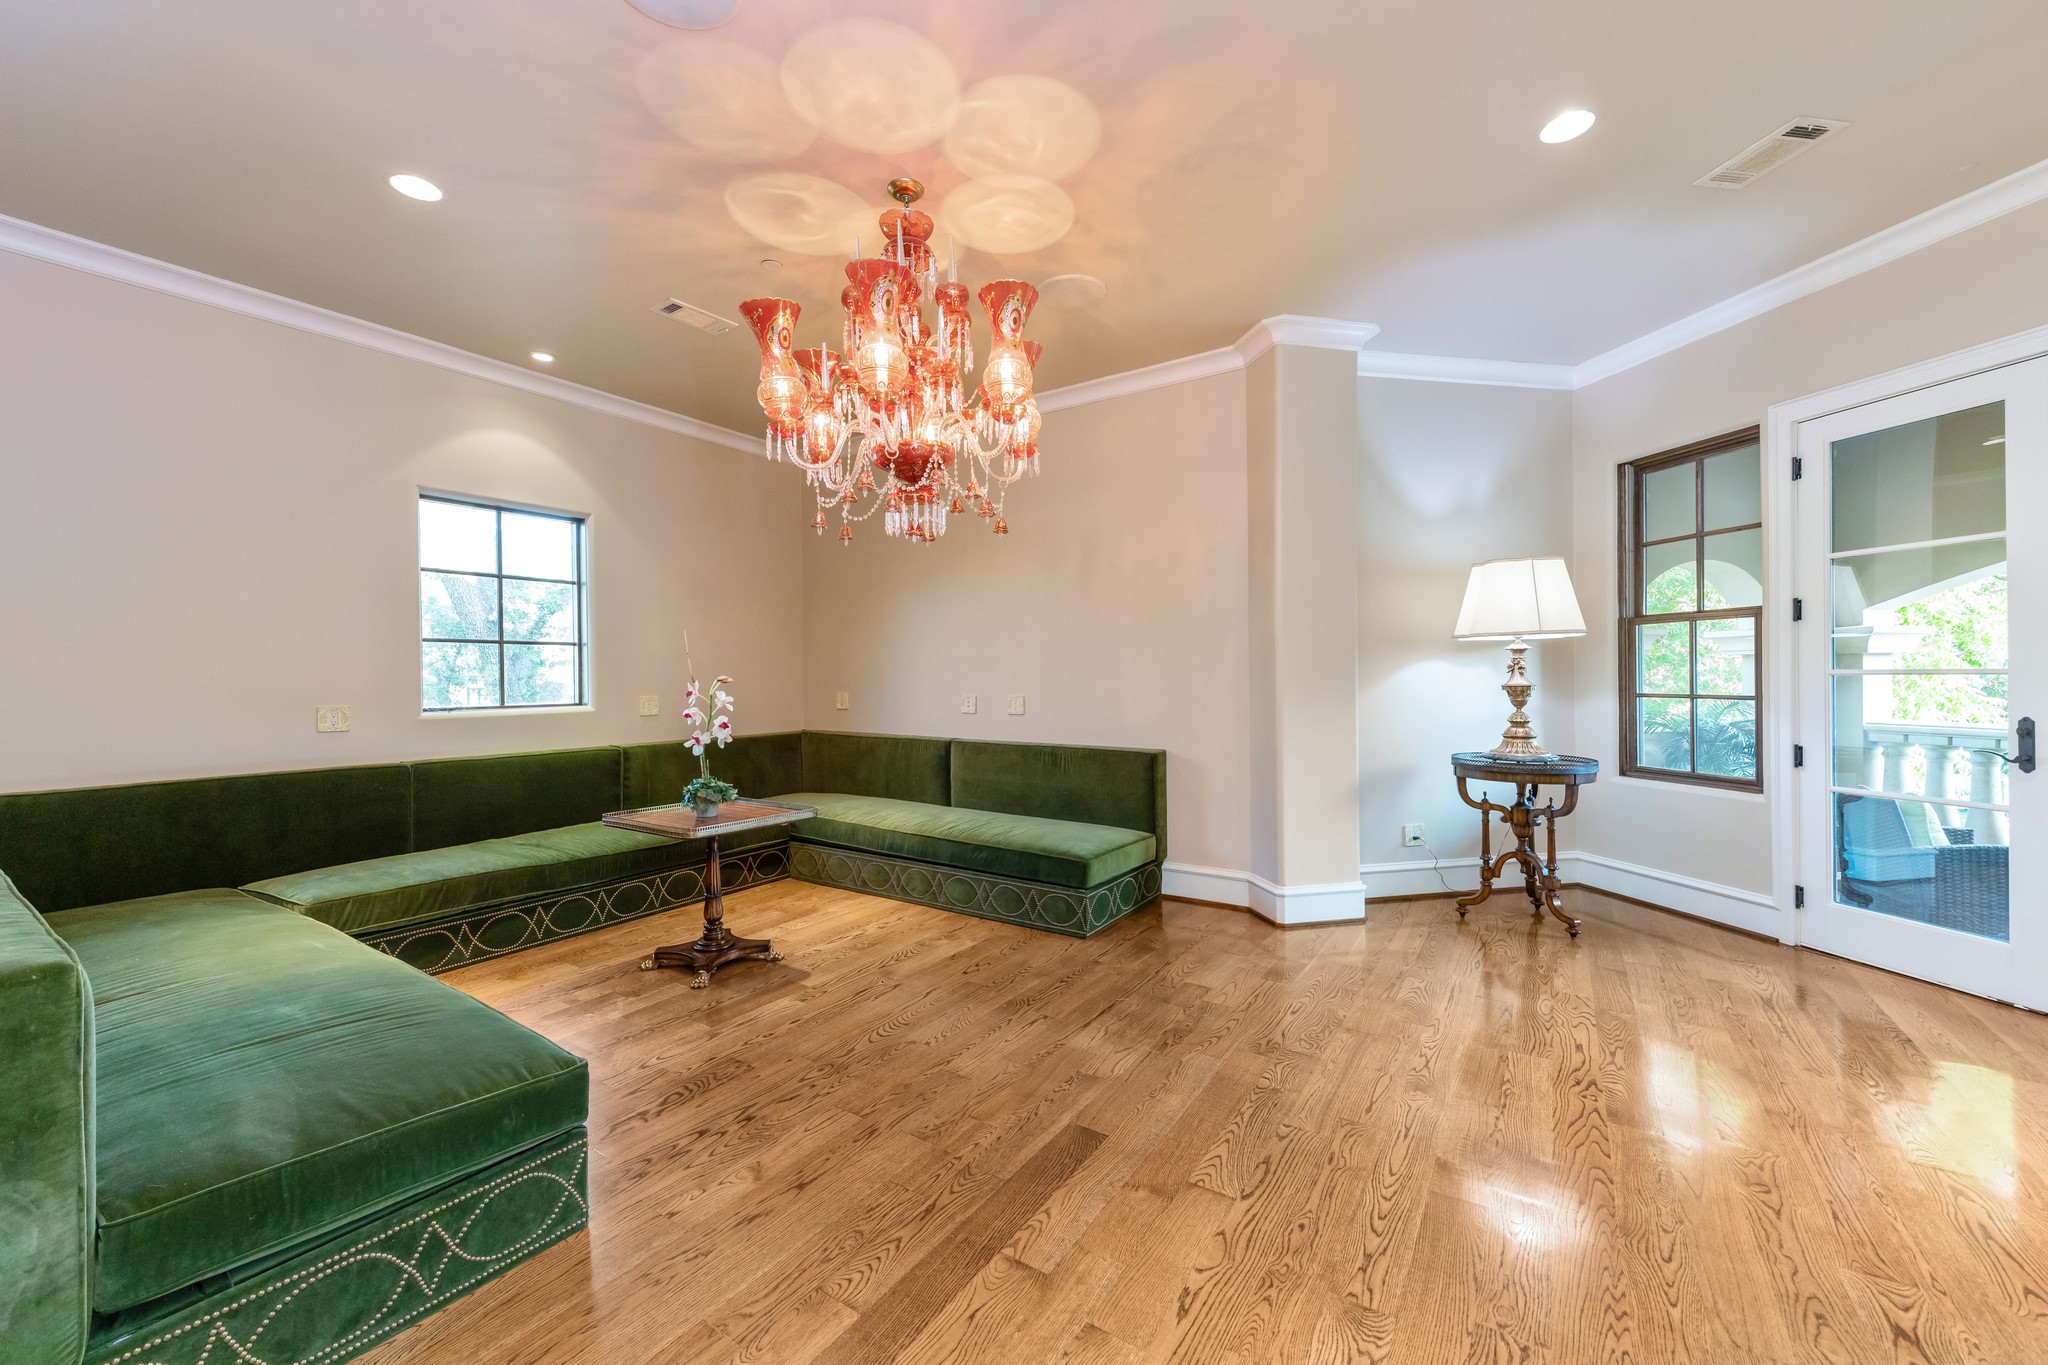 Custom ornate carved wood doors lead into this fun multi purpose party room that boasts luxurious custom designed built-in banquette sofa seating with green velvet cushions. Another set of french doors opens to a covered balcony with decorative stained wood and 42” baluster railing.